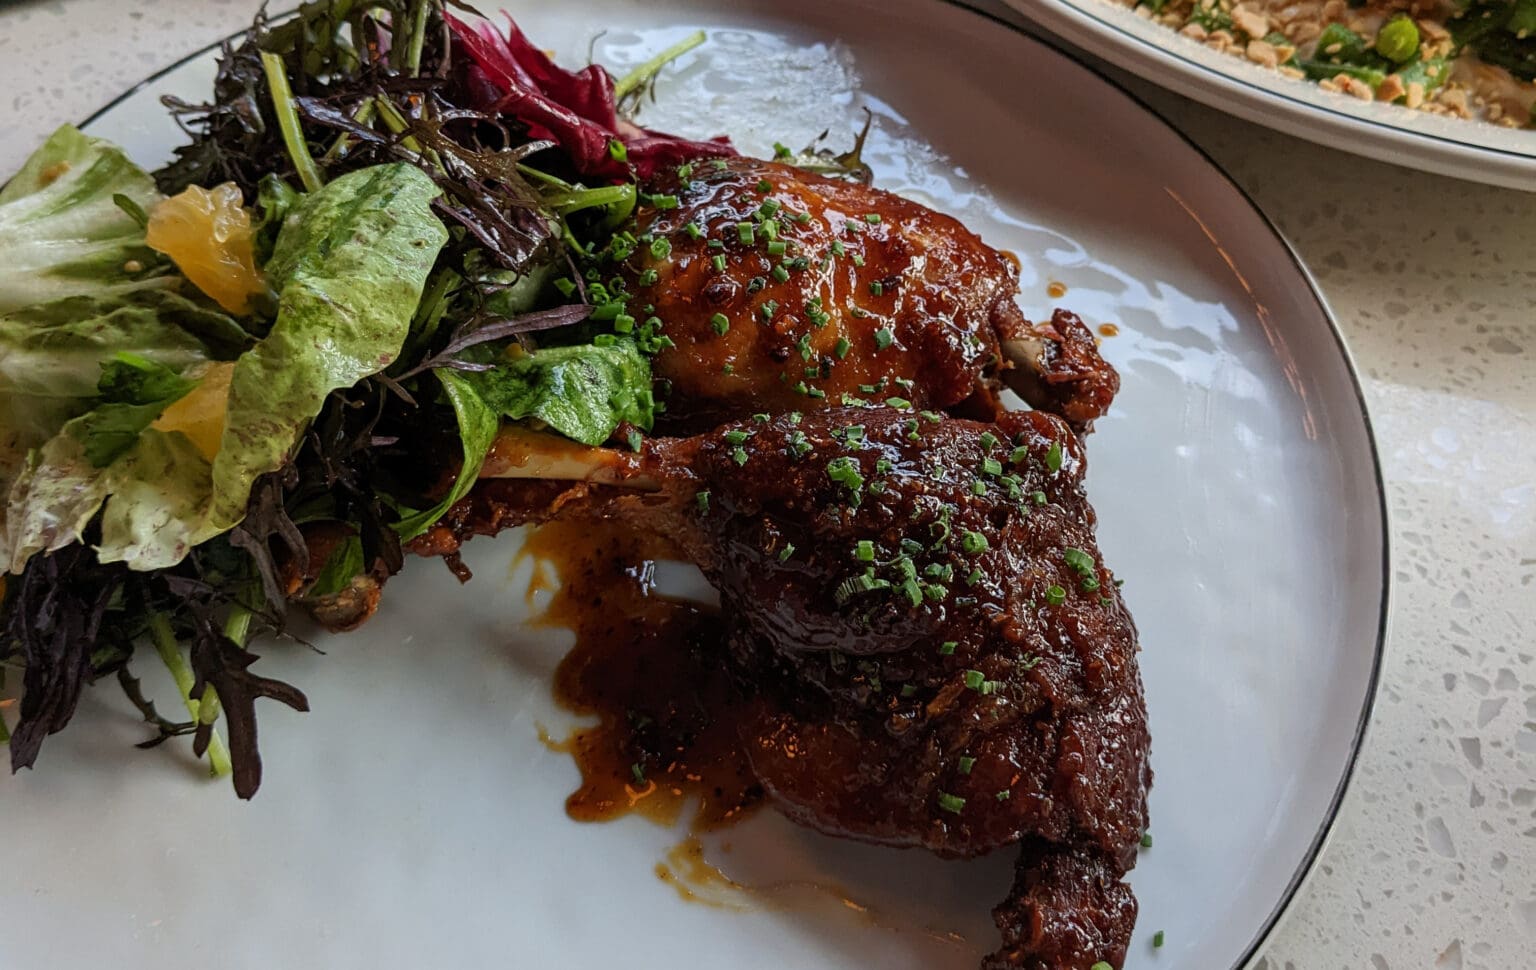 Bistro Estelle's duck confit was highlighted when Esquire Magazine named the Fairhaven restaurant in its list of the 50 "Best New Restaurants in America